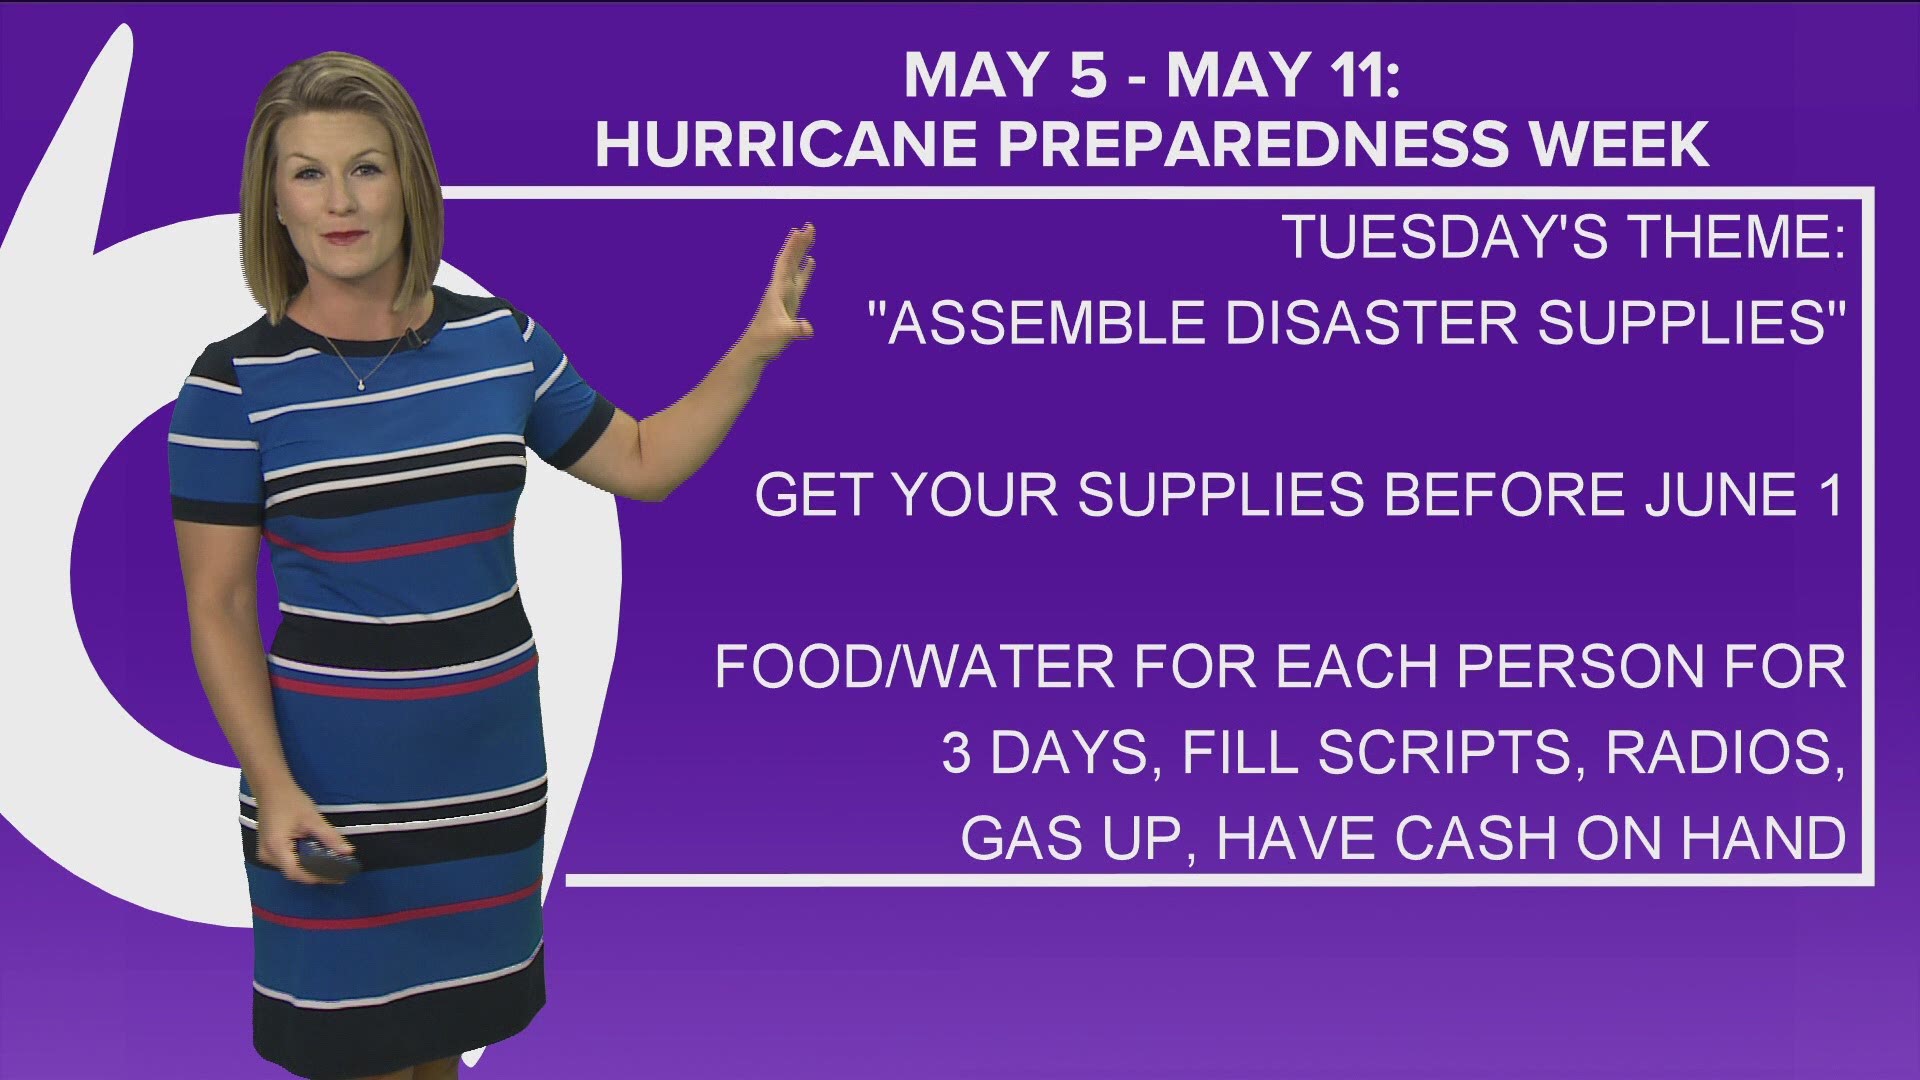 Just having enough supplies to make it through a hurricane isn’t enough. You need plenty to make it through what could be a LONG recovery period too. Water and electricity could be out for a week or more.